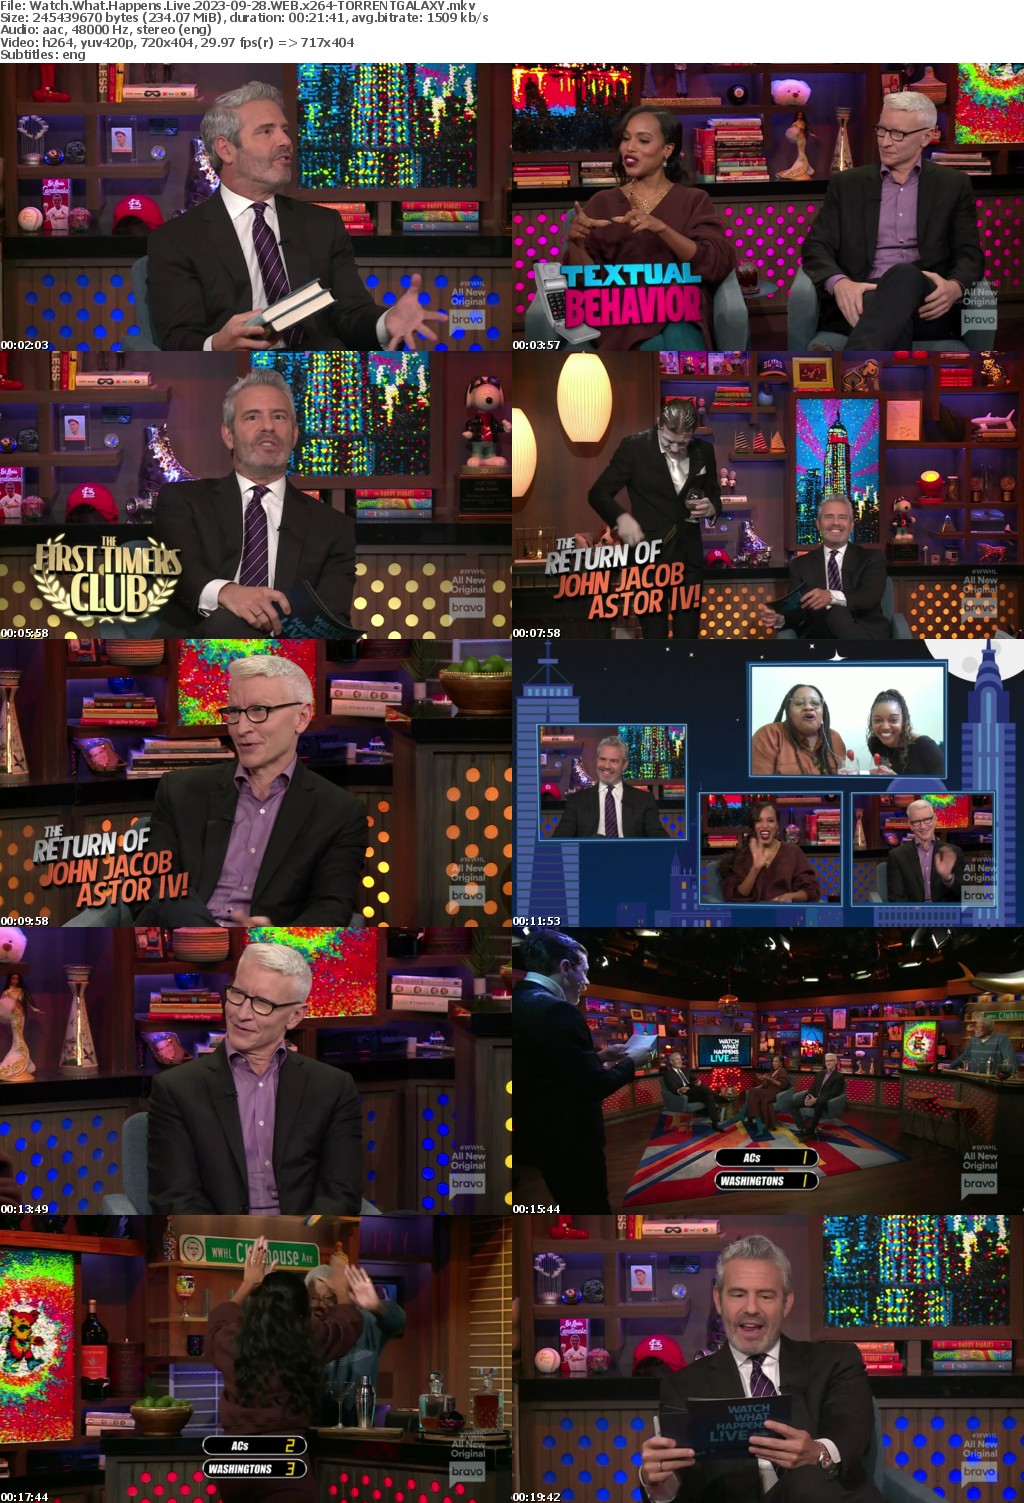 Watch What Happens Live 2023-09-28 WEB x264-GALAXY